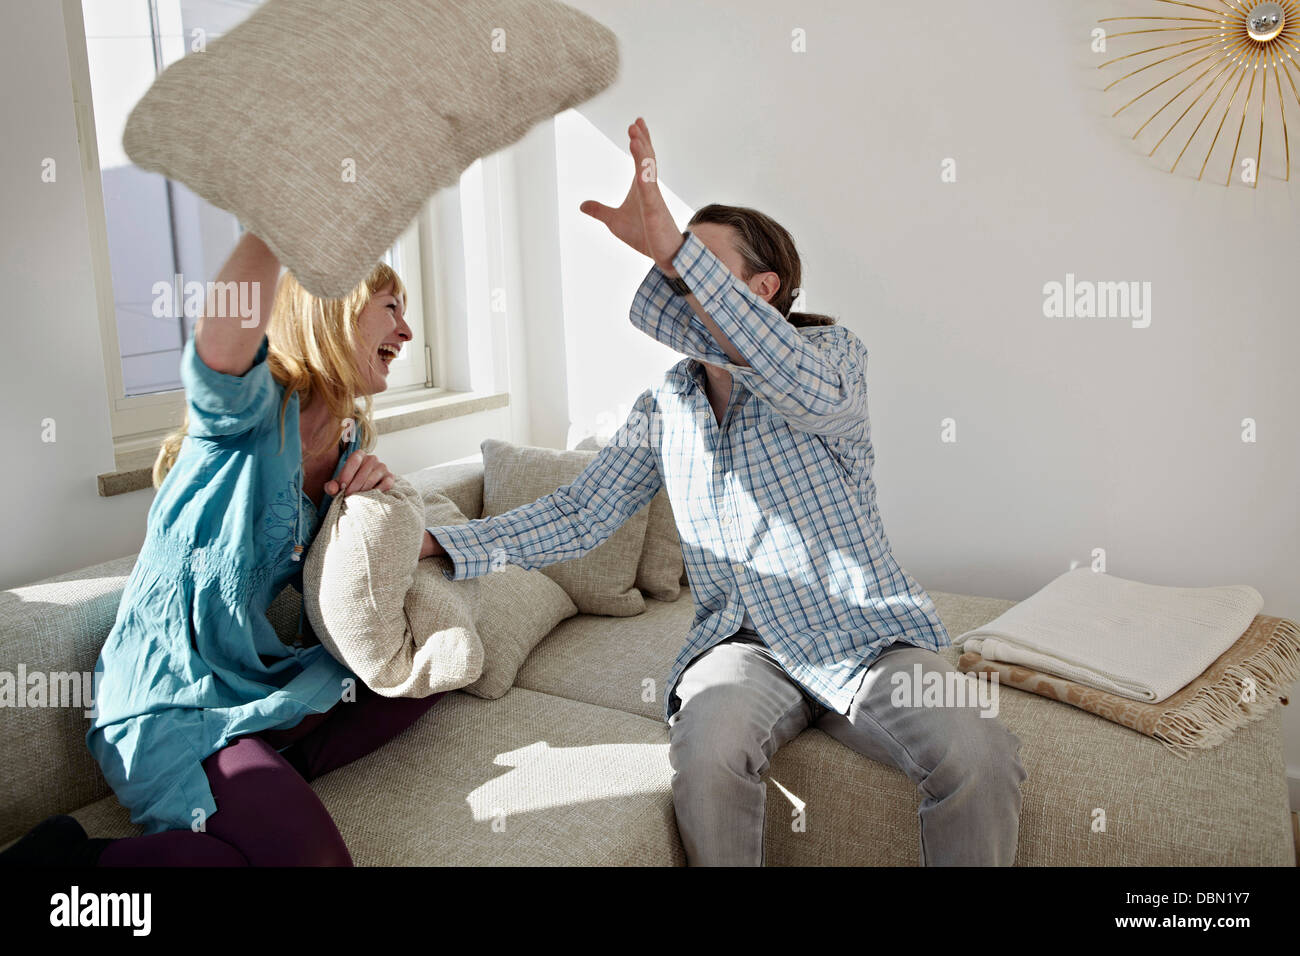 A Couple Pillow Fights In Their Living Room Stock Photo